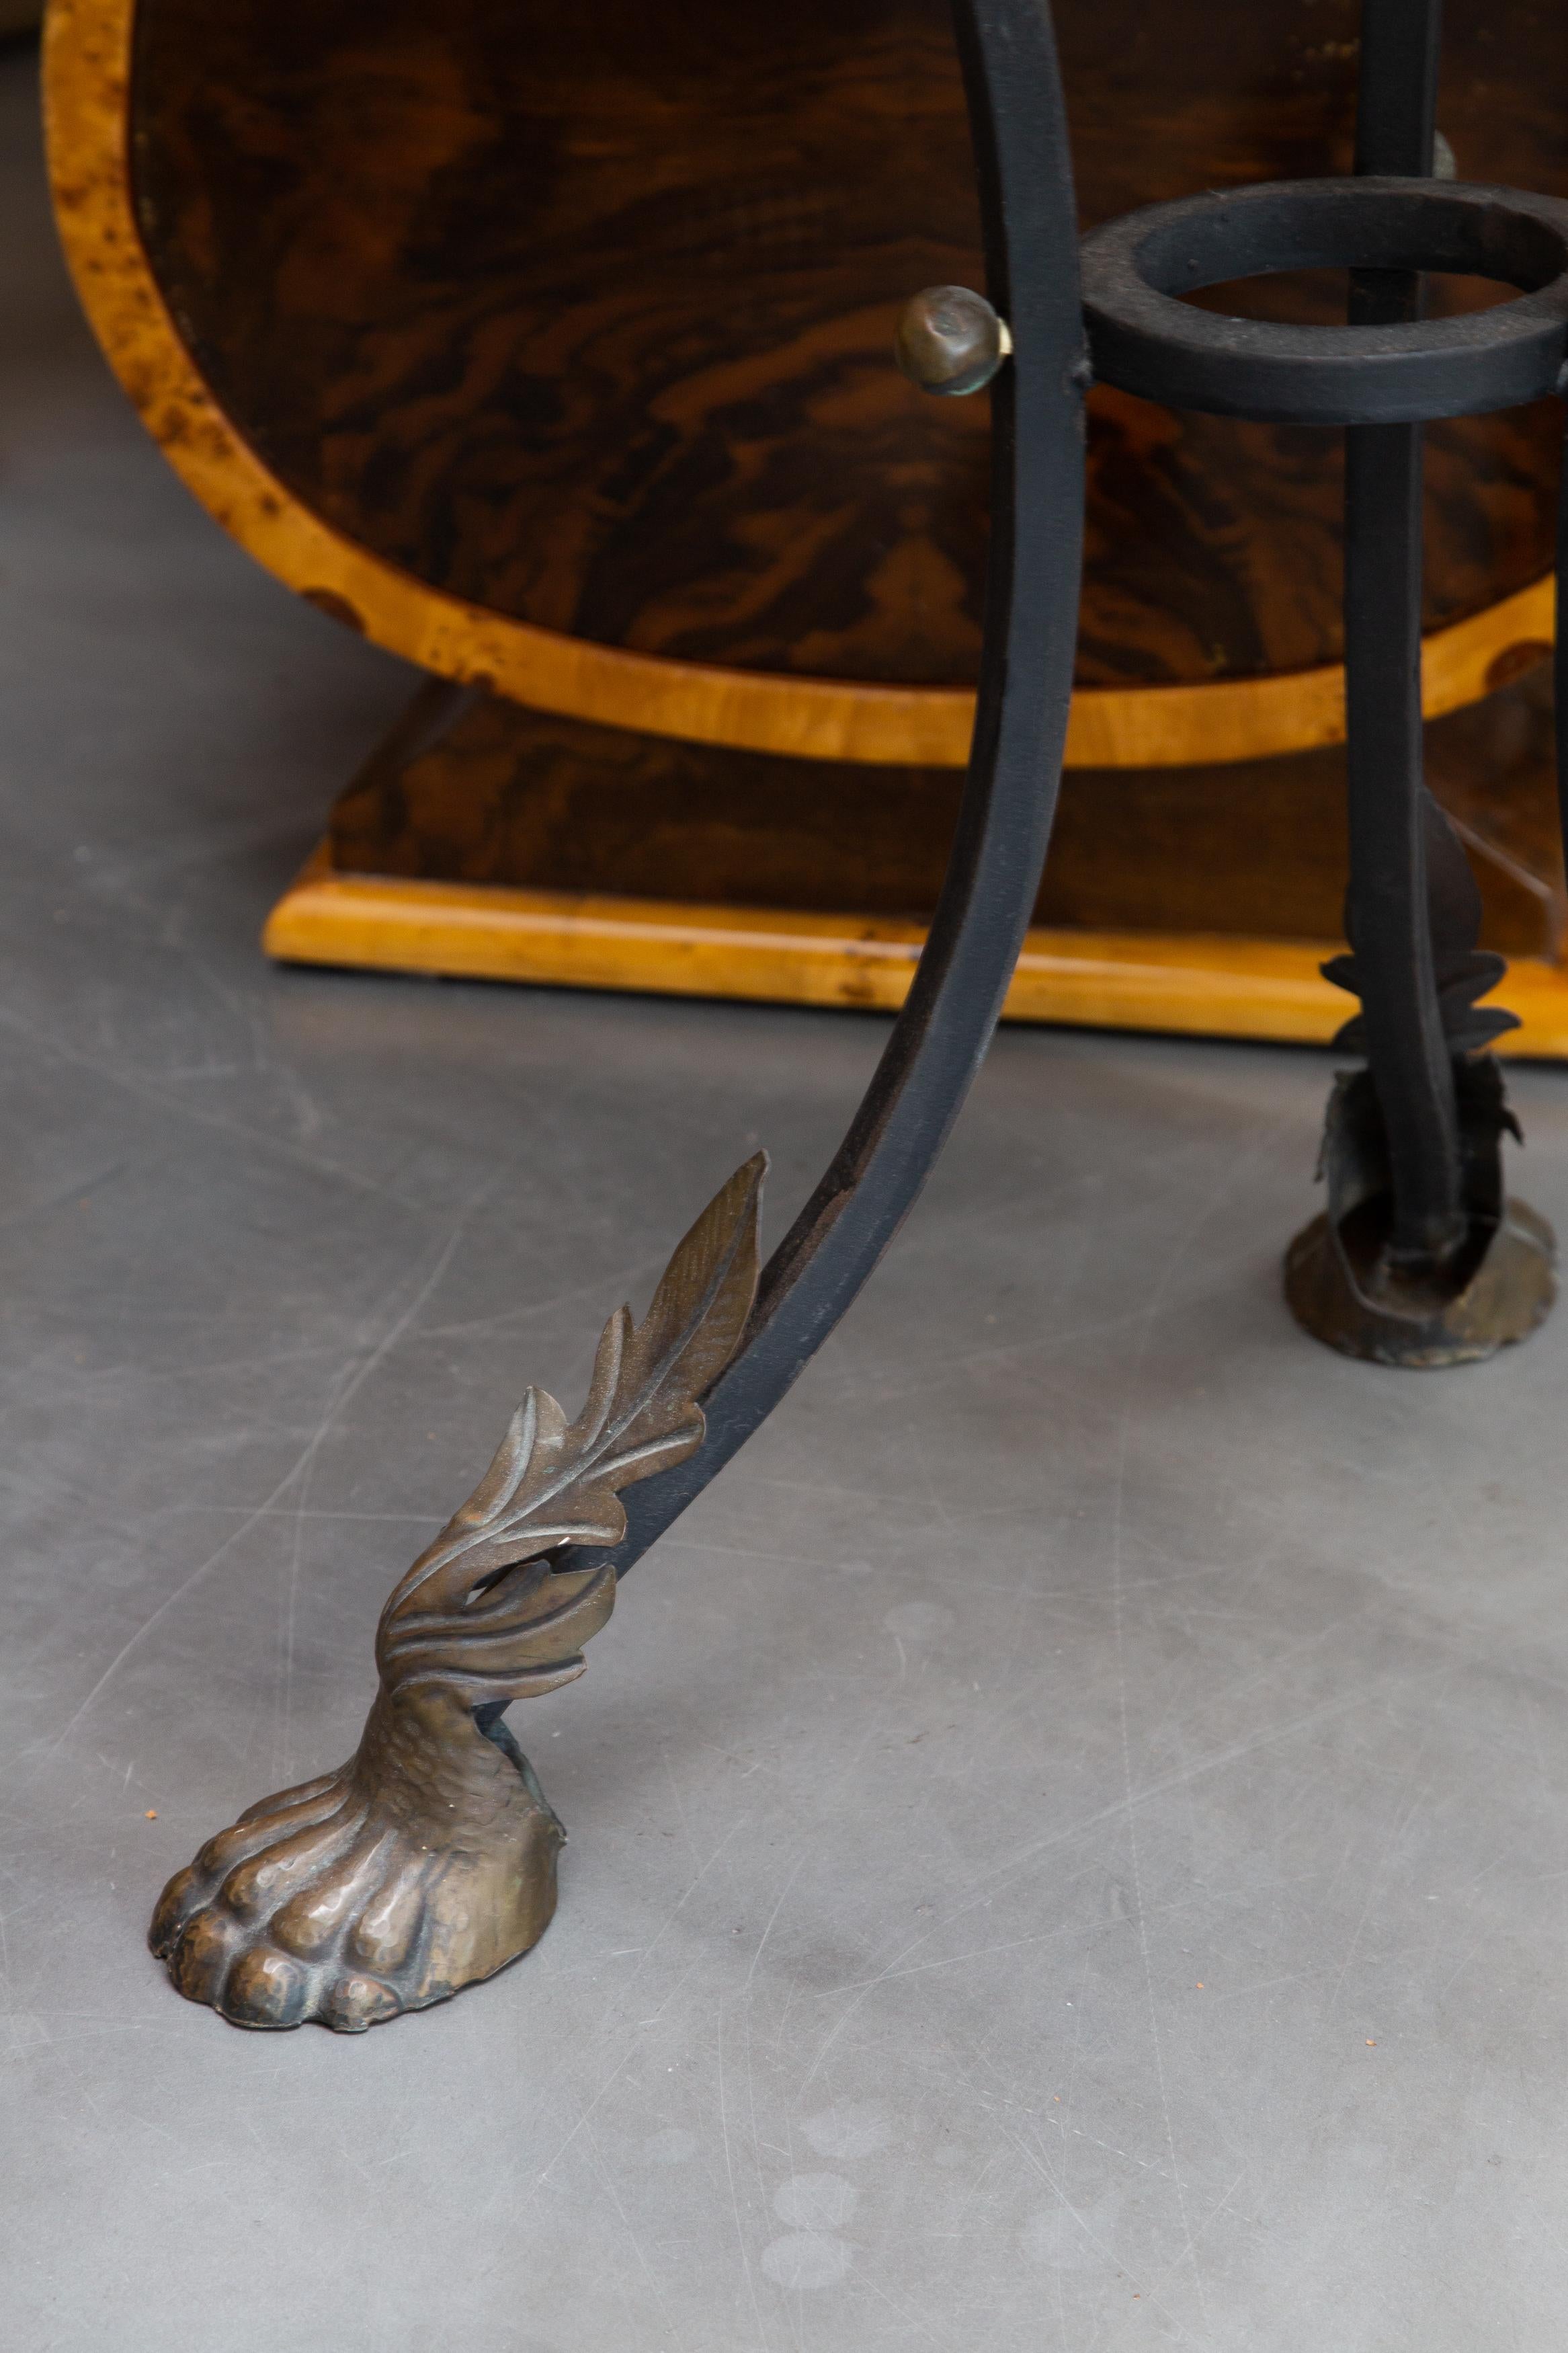 This is a stately bronze jardiniere with a large scalloped bowl resting on curved legs terminating in paw feet, 19th century.